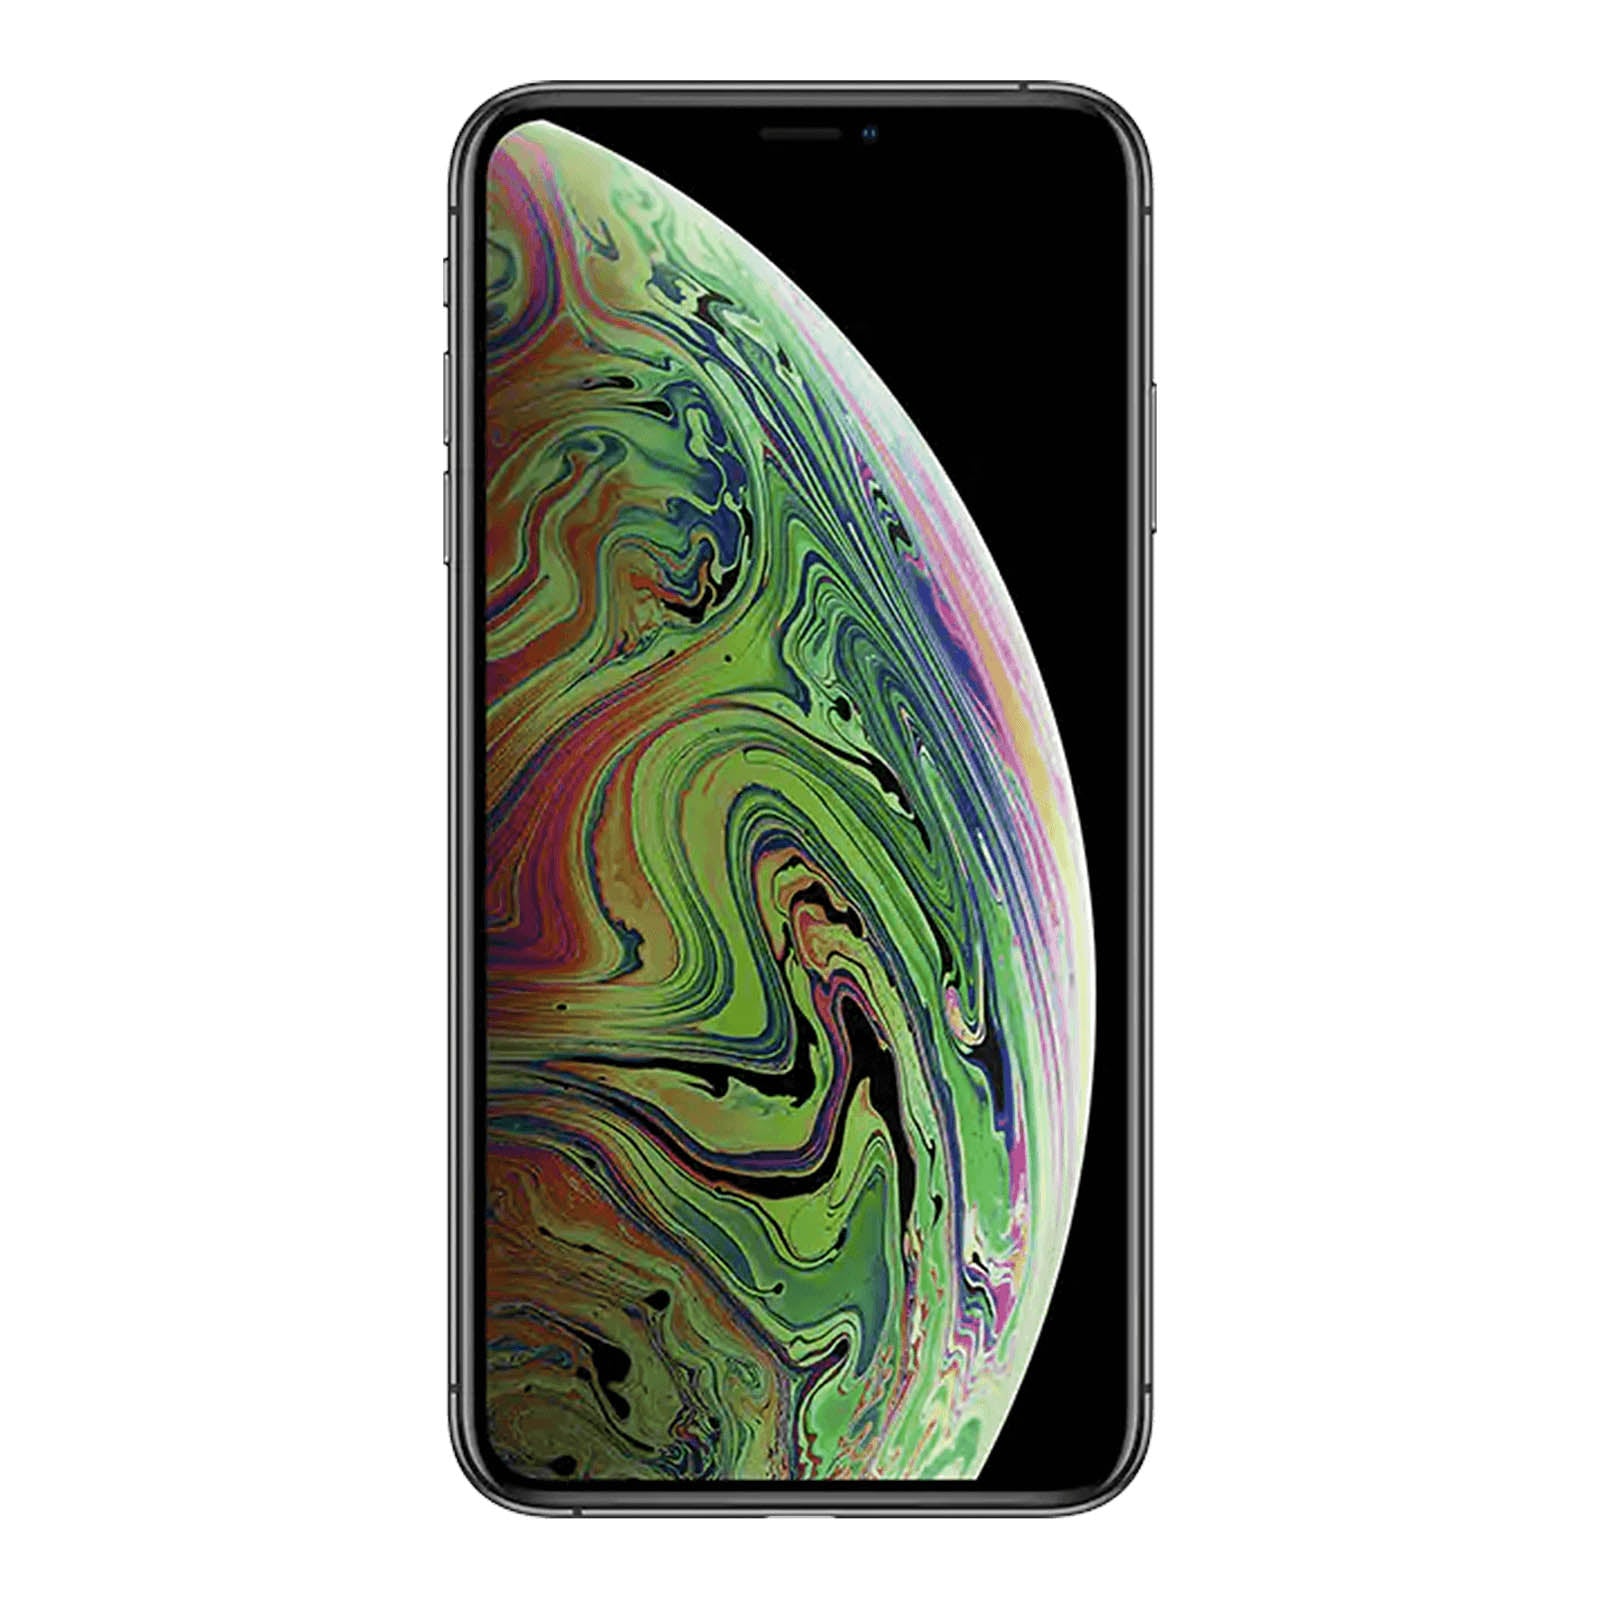 Apple iPhone XS Max 512GB Space Grey Good - AT&T